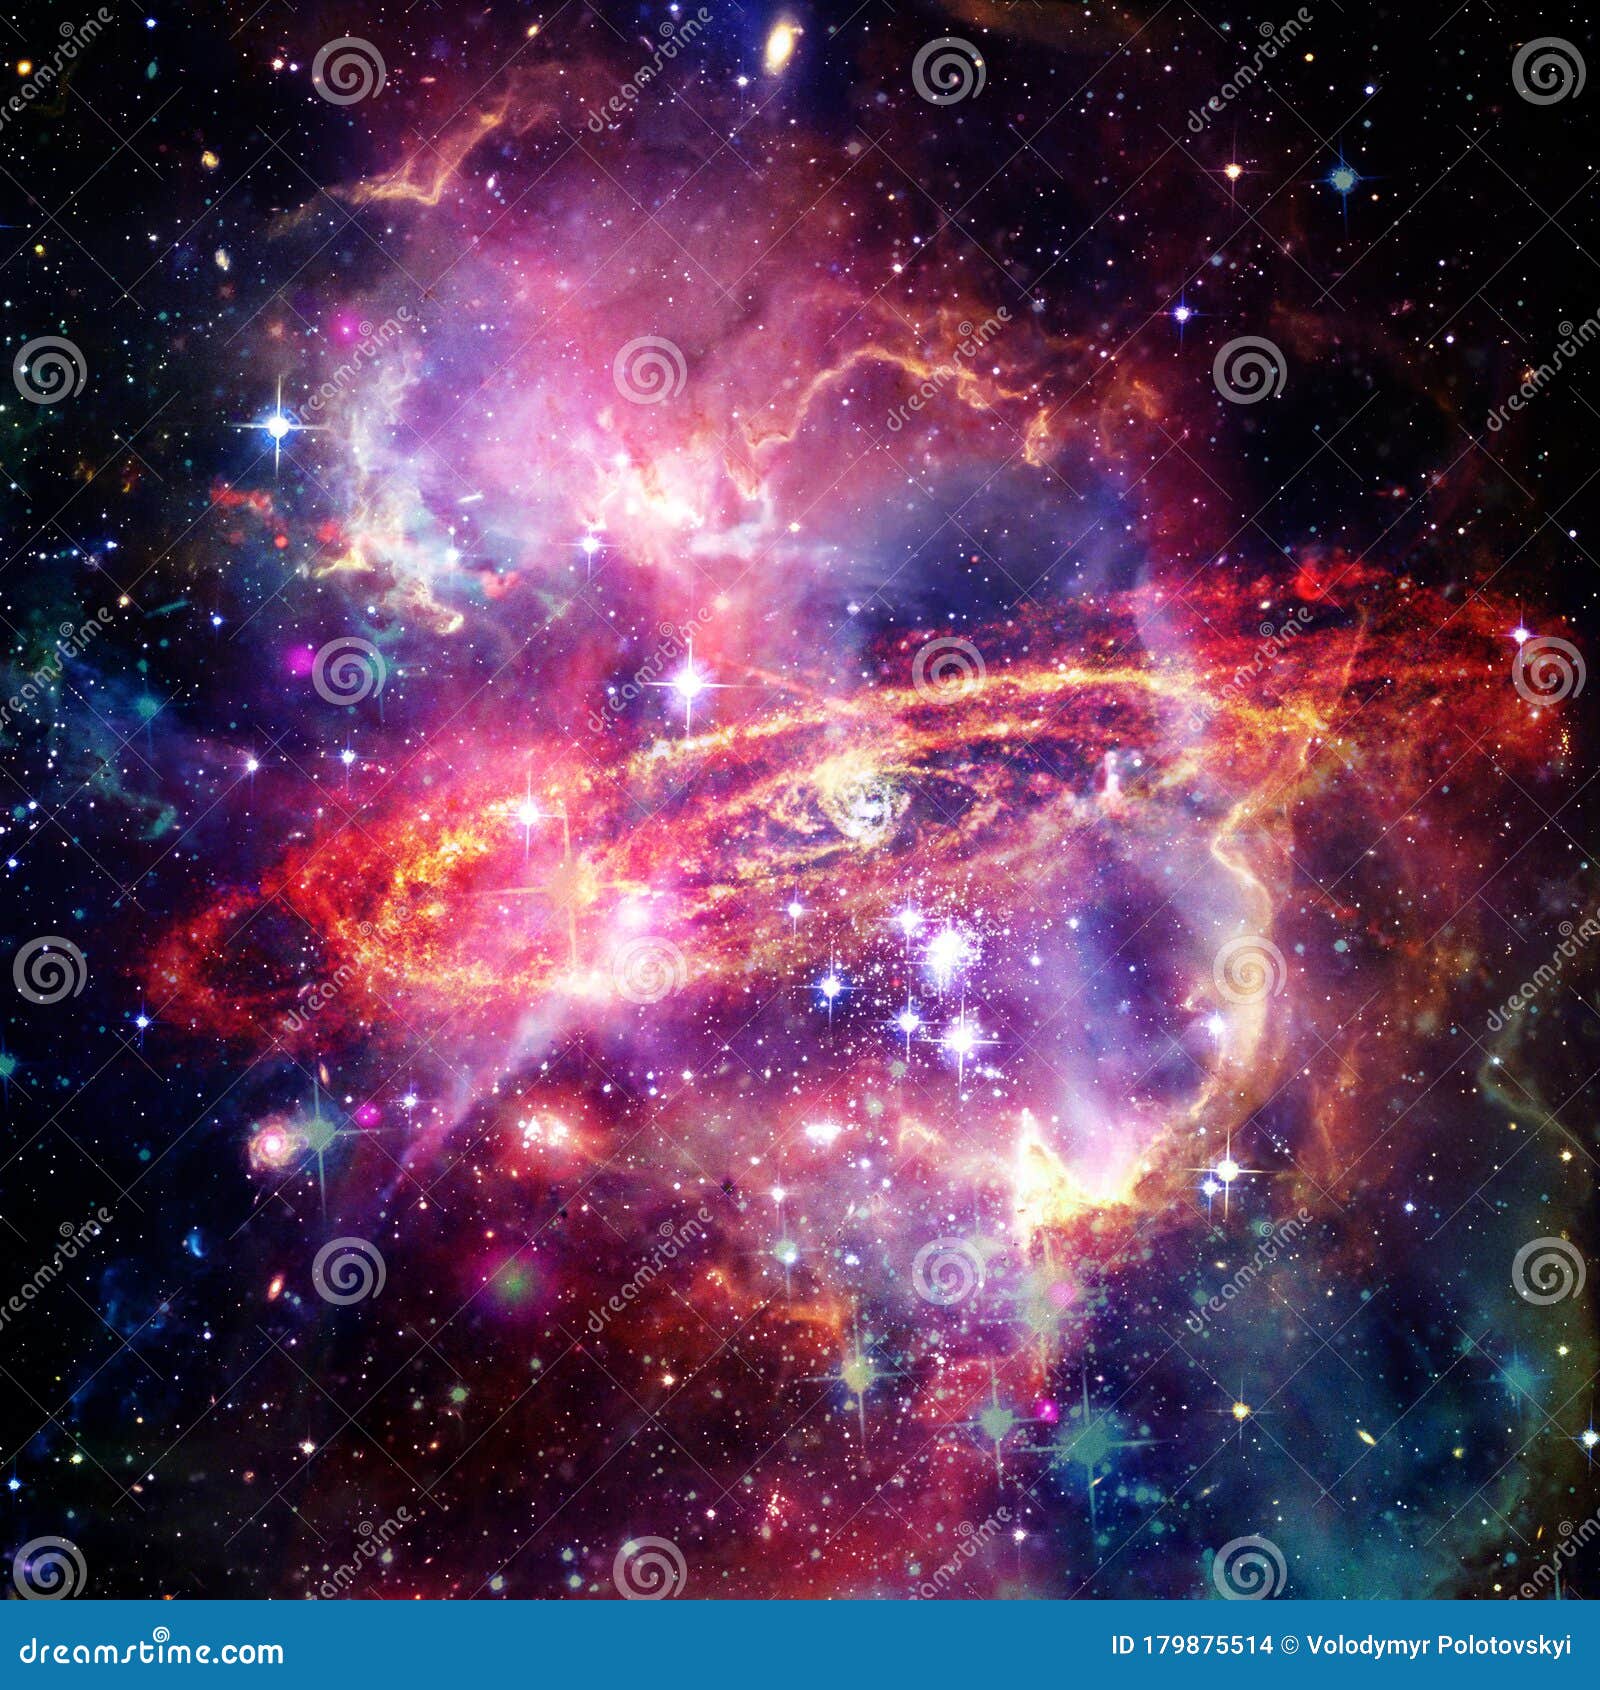 Space Background With Colorful Galaxy Cloud Nebula The Elements Of This Image Furnished By Nasa Stock Photo Image Of Orbit Milky 179875514